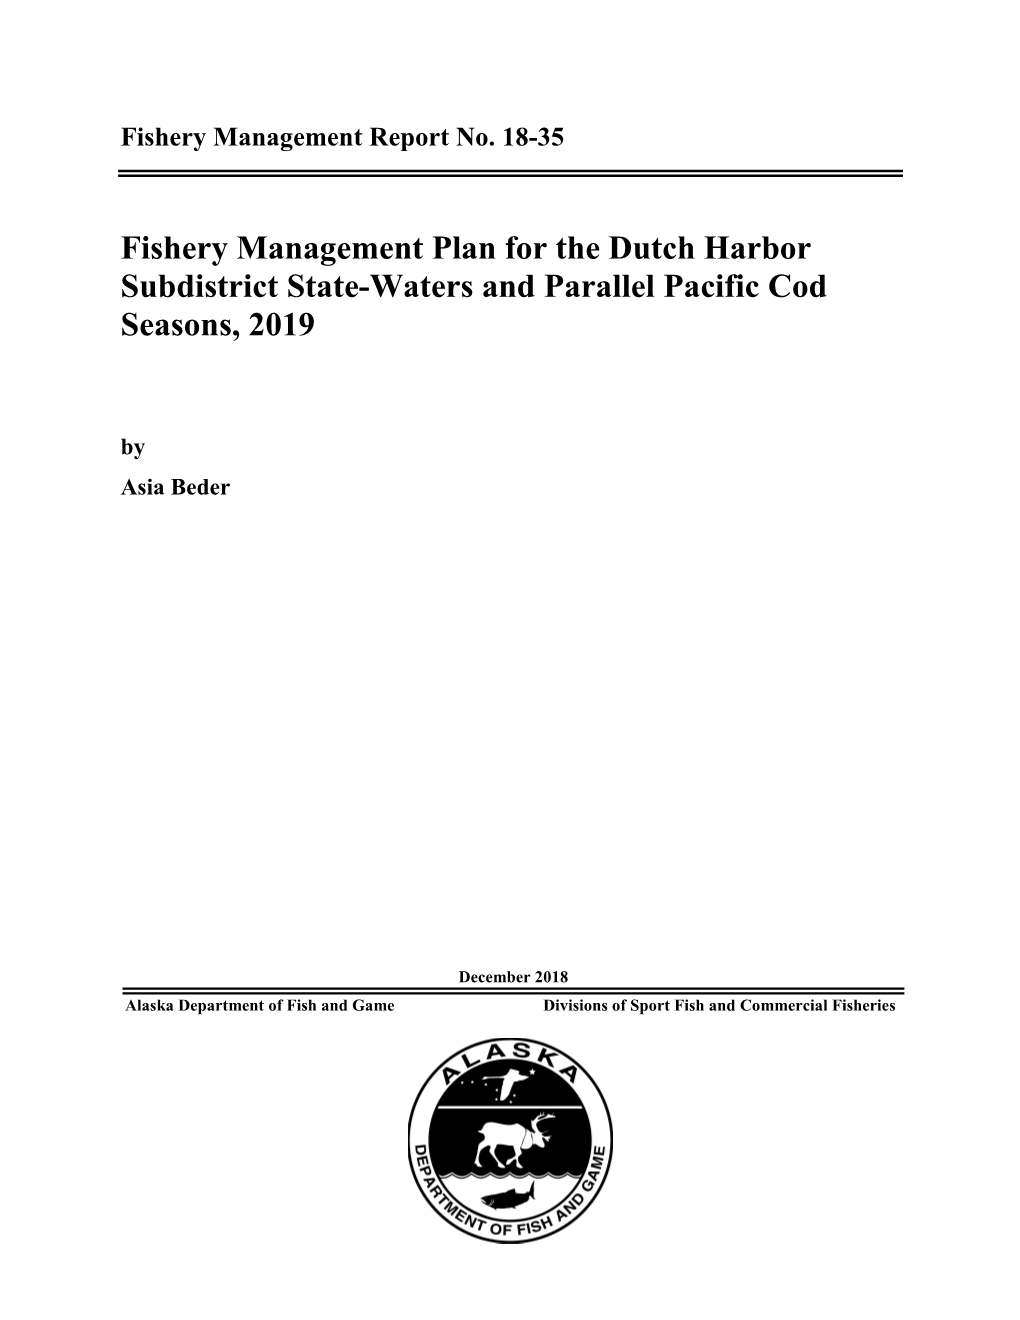 Fishery Management Plan for the Dutch Harbor Subdistrict State-Waters and Parallel Pacific Cod Seasons, 2019